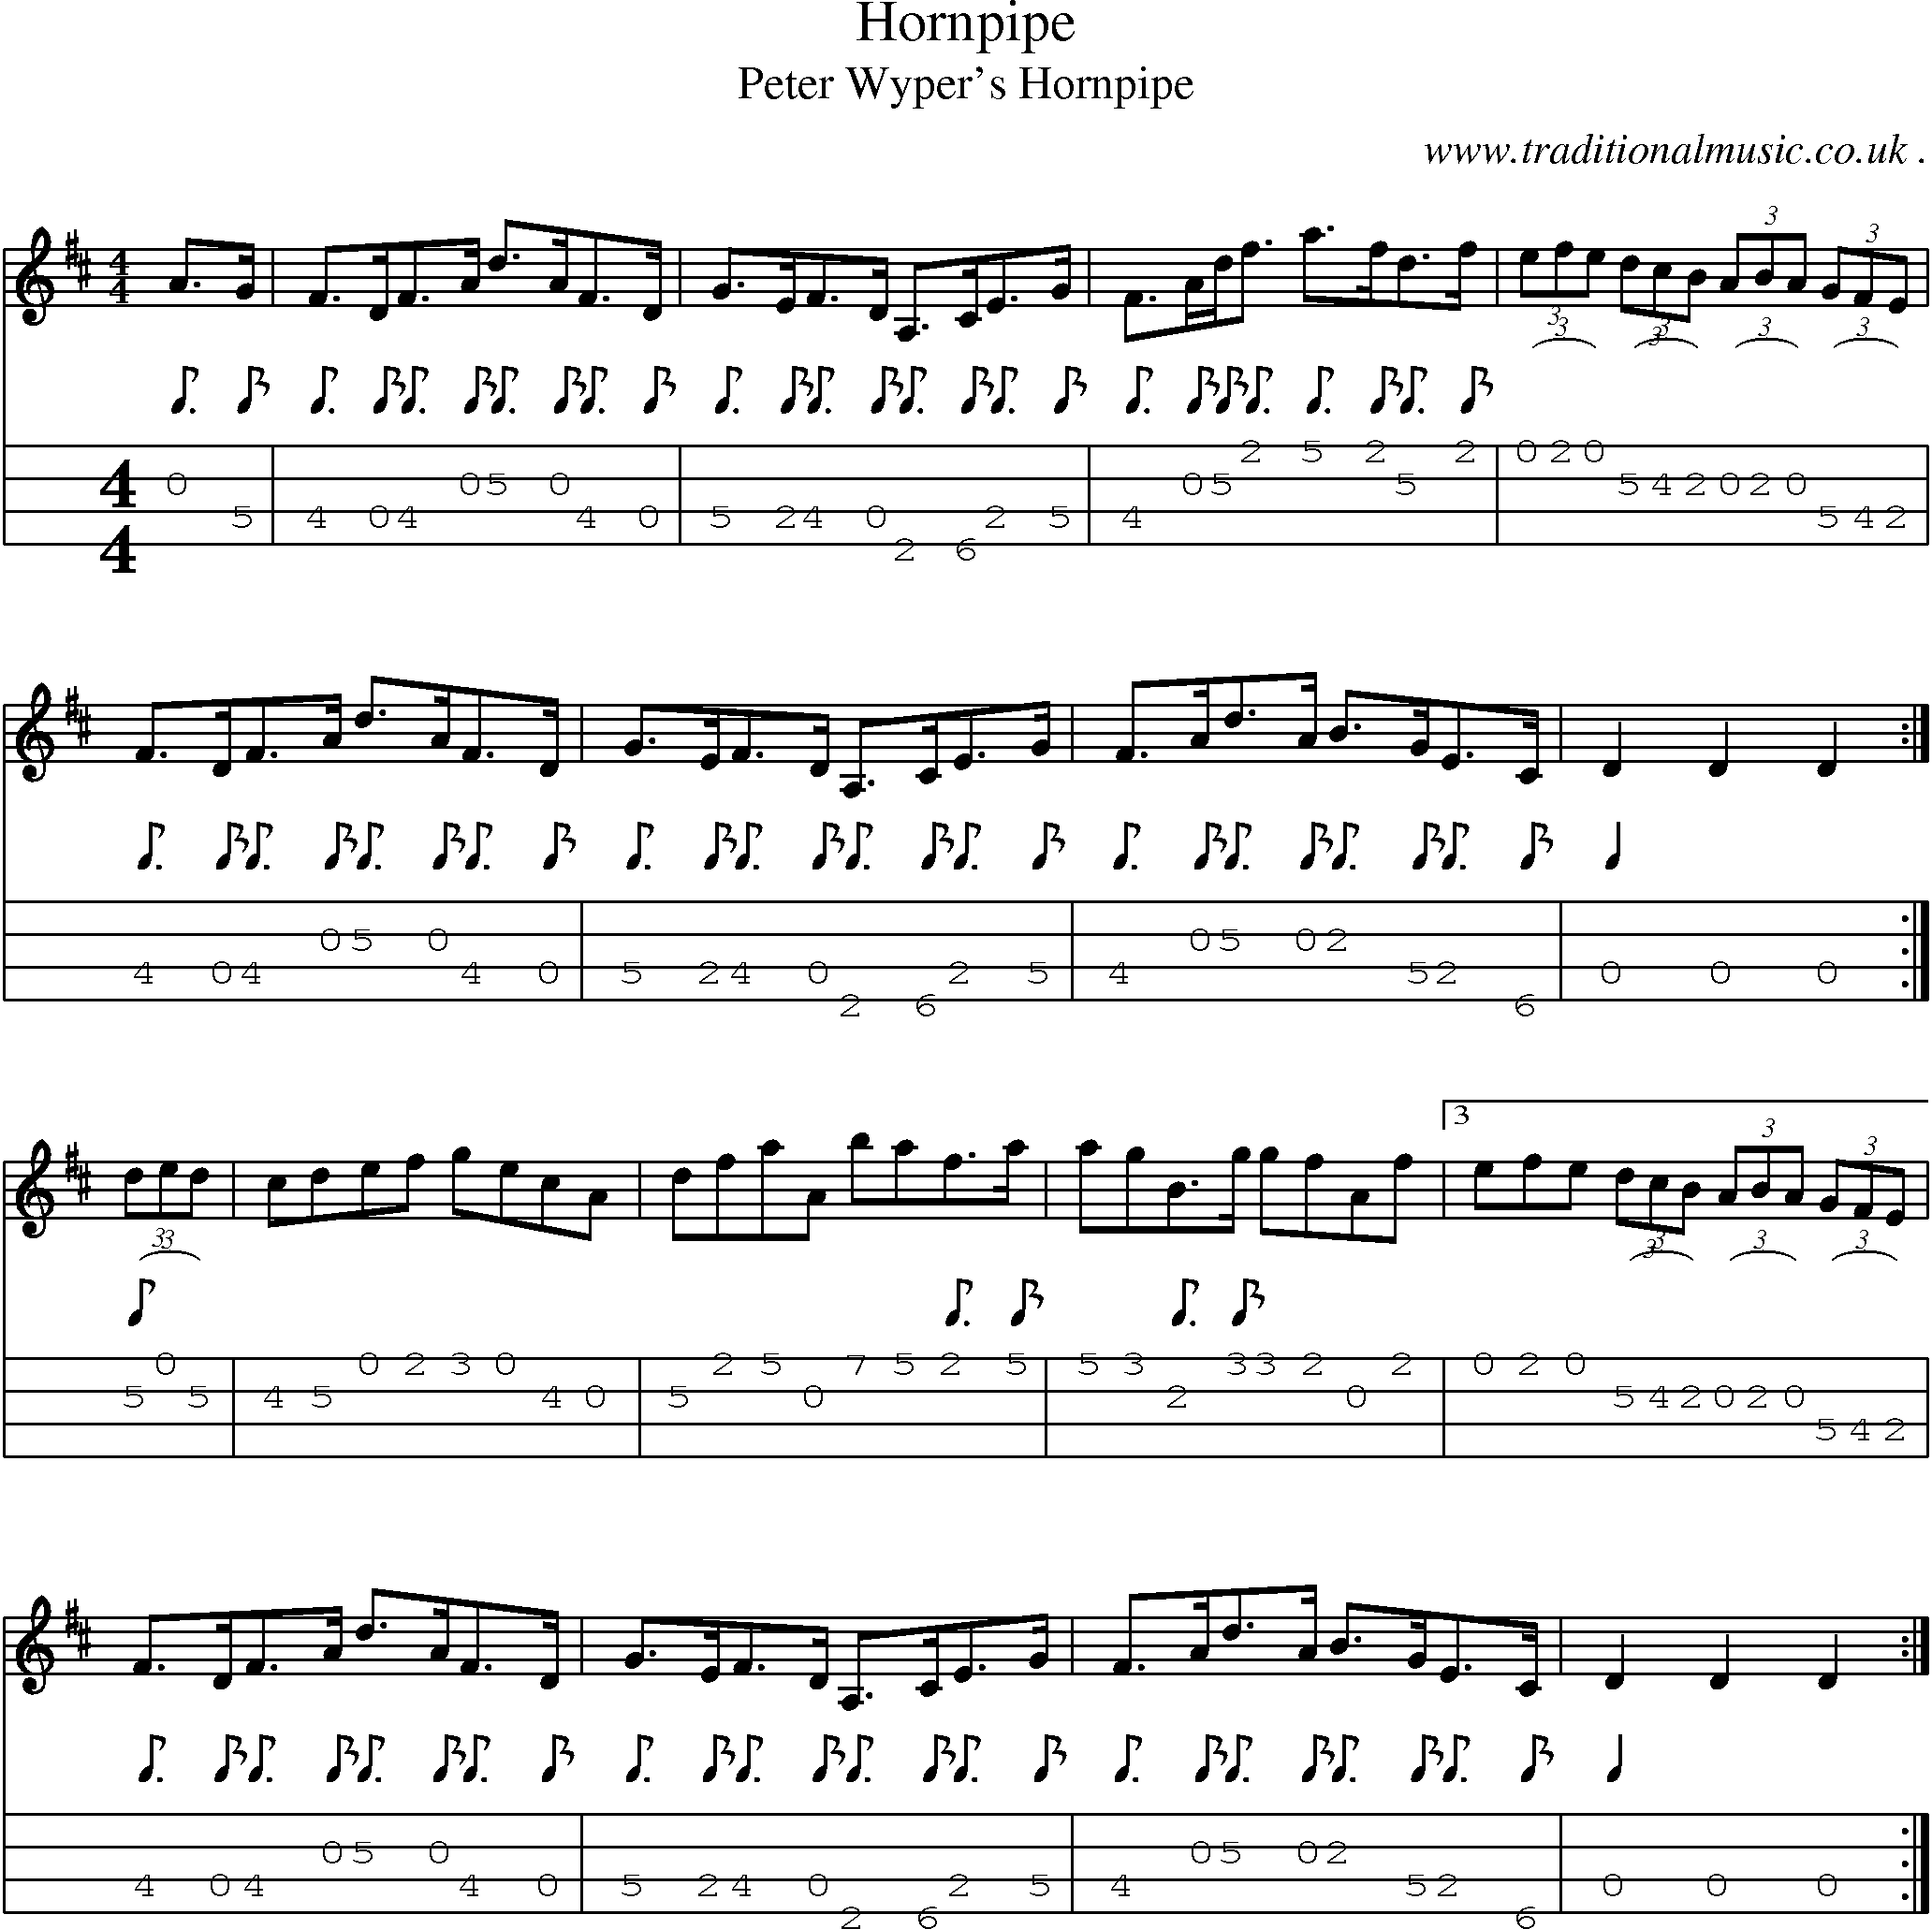 Sheet-music  score, Chords and Mandolin Tabs for Hornpipe